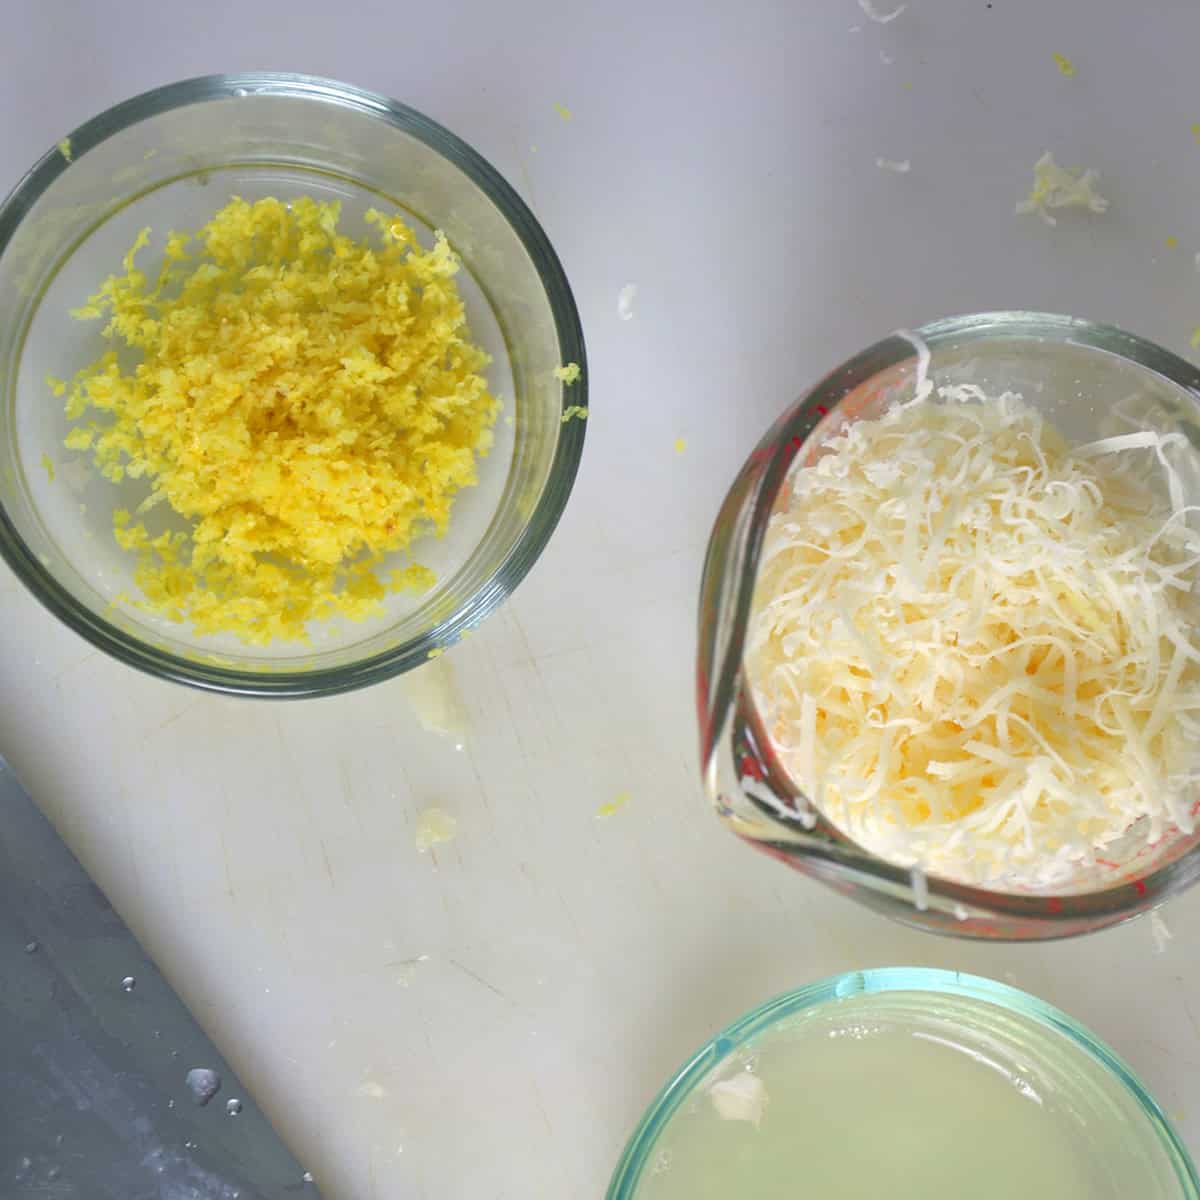 Lemon zest, lemon juice, and cheese in containers.